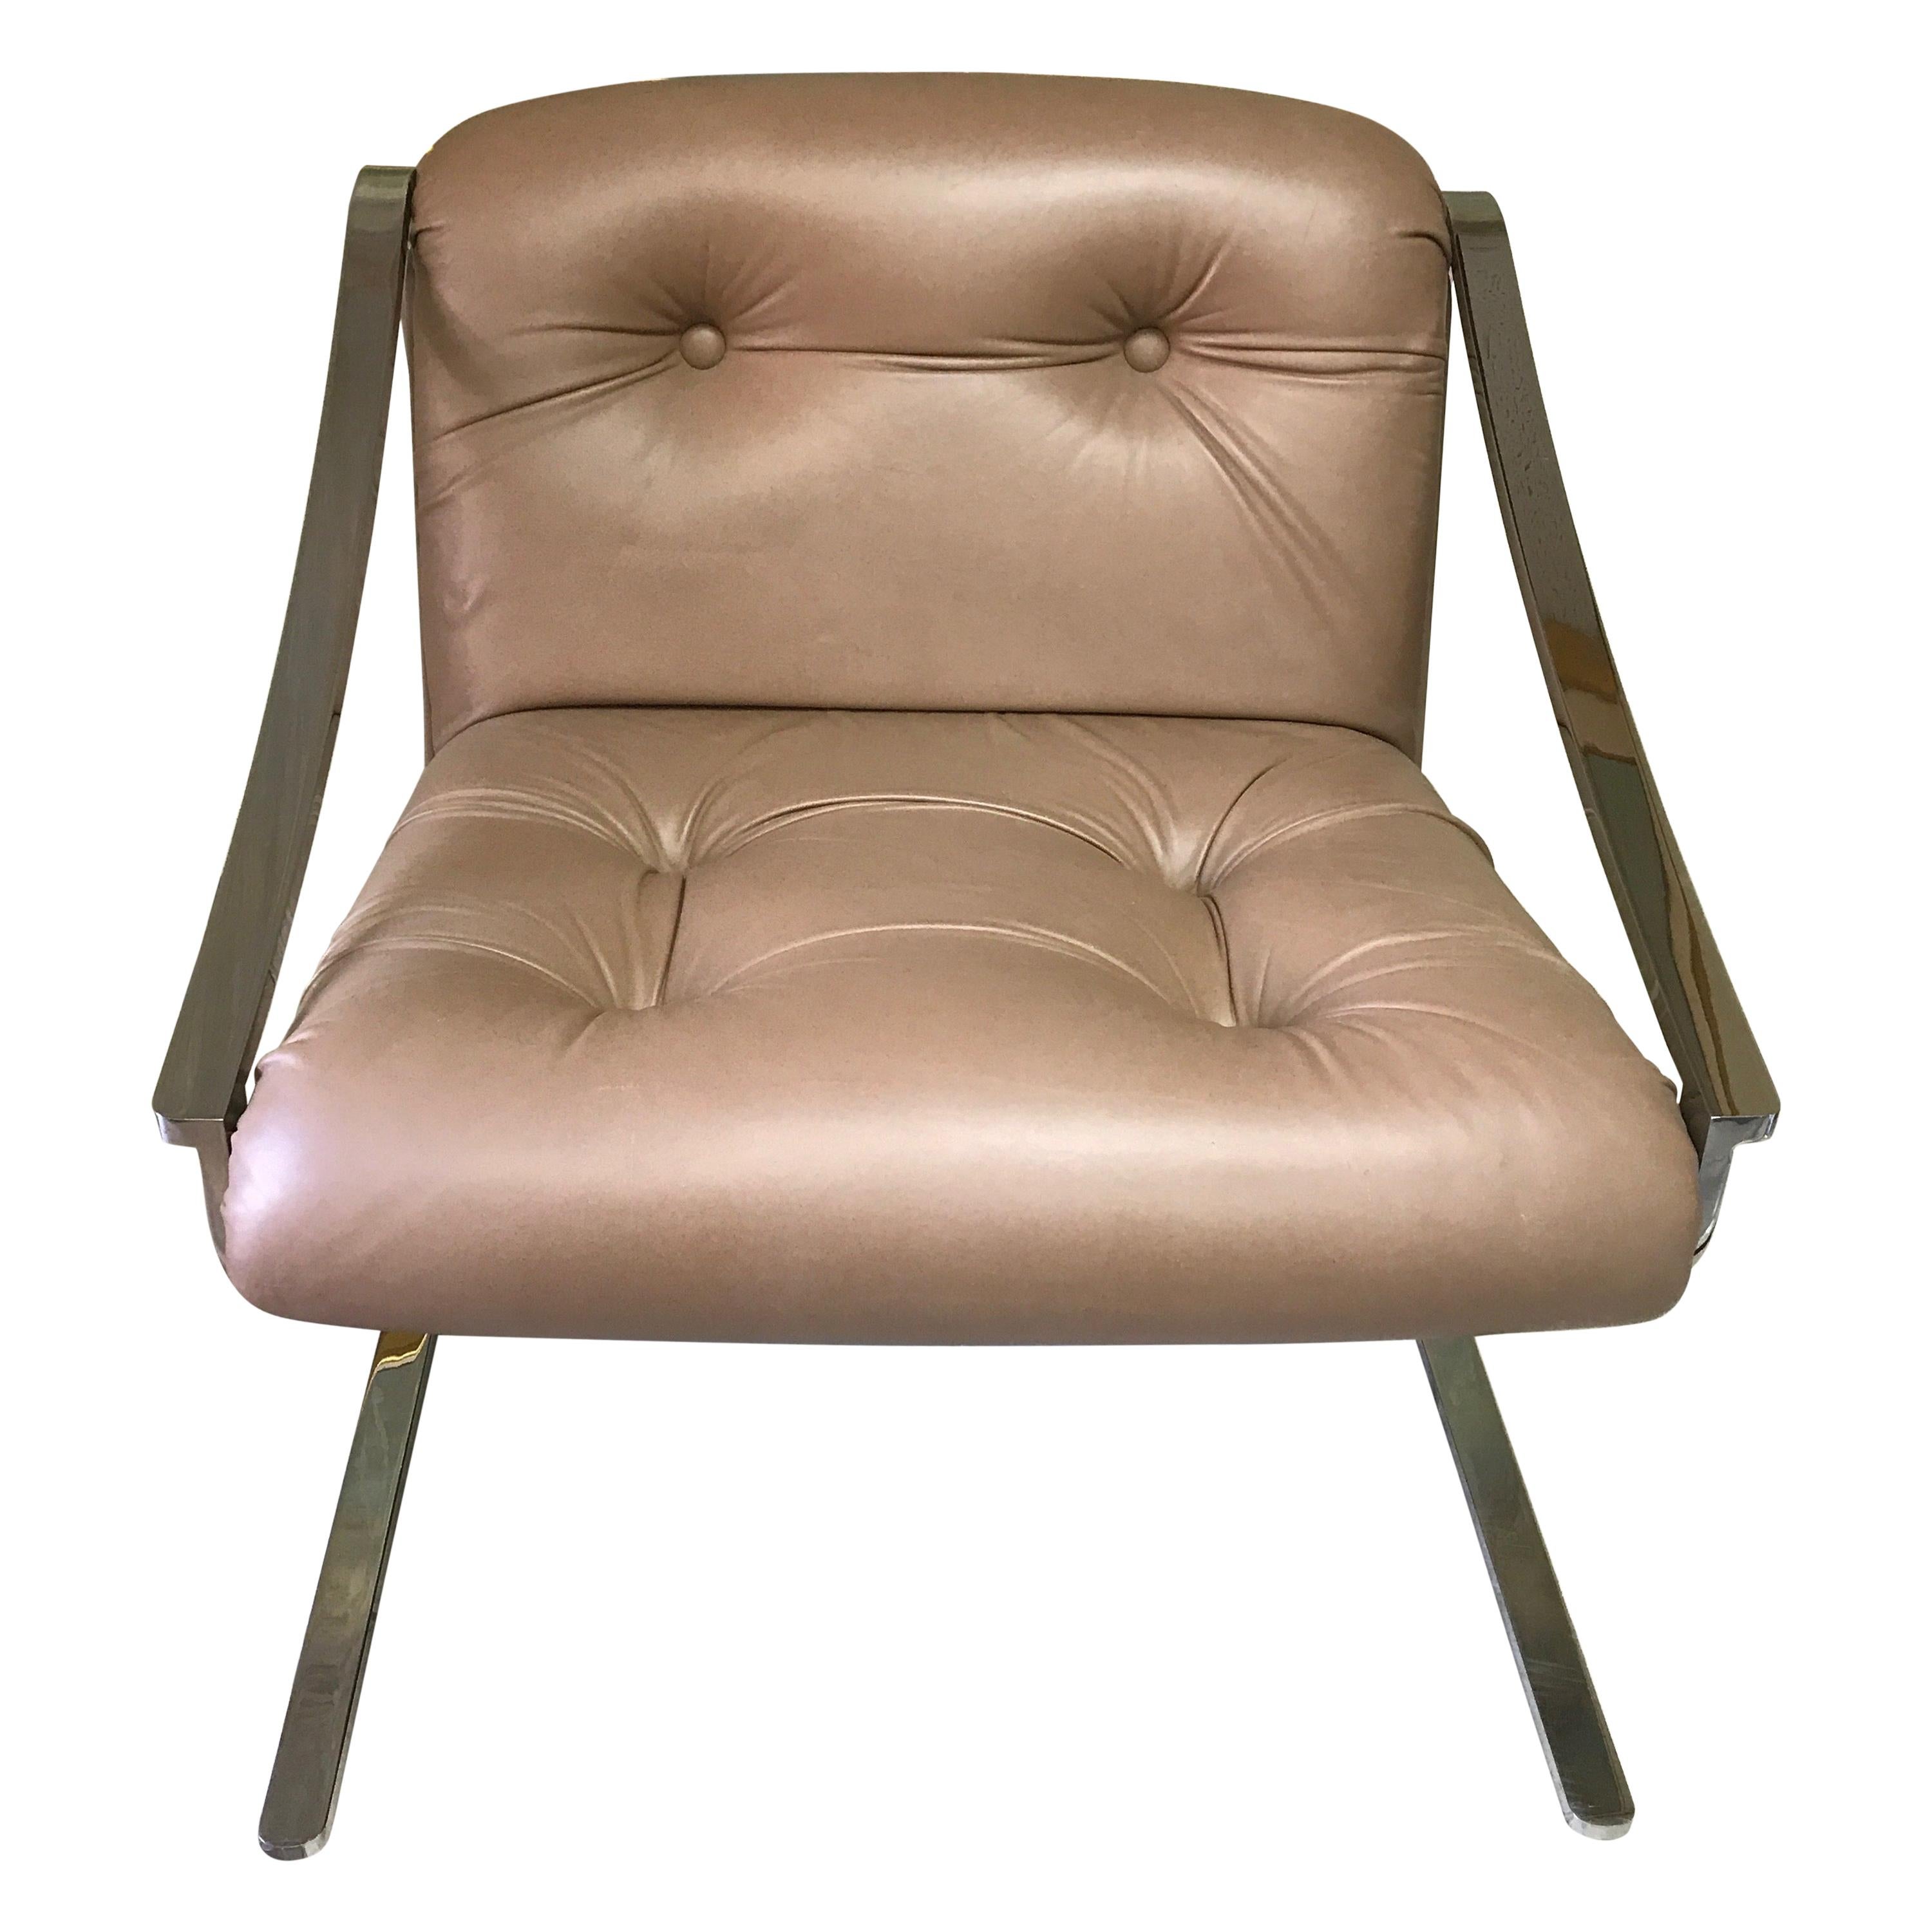 Mid-Century Modern Leather and Stainless Steel Armchair by Charles Gibilterra